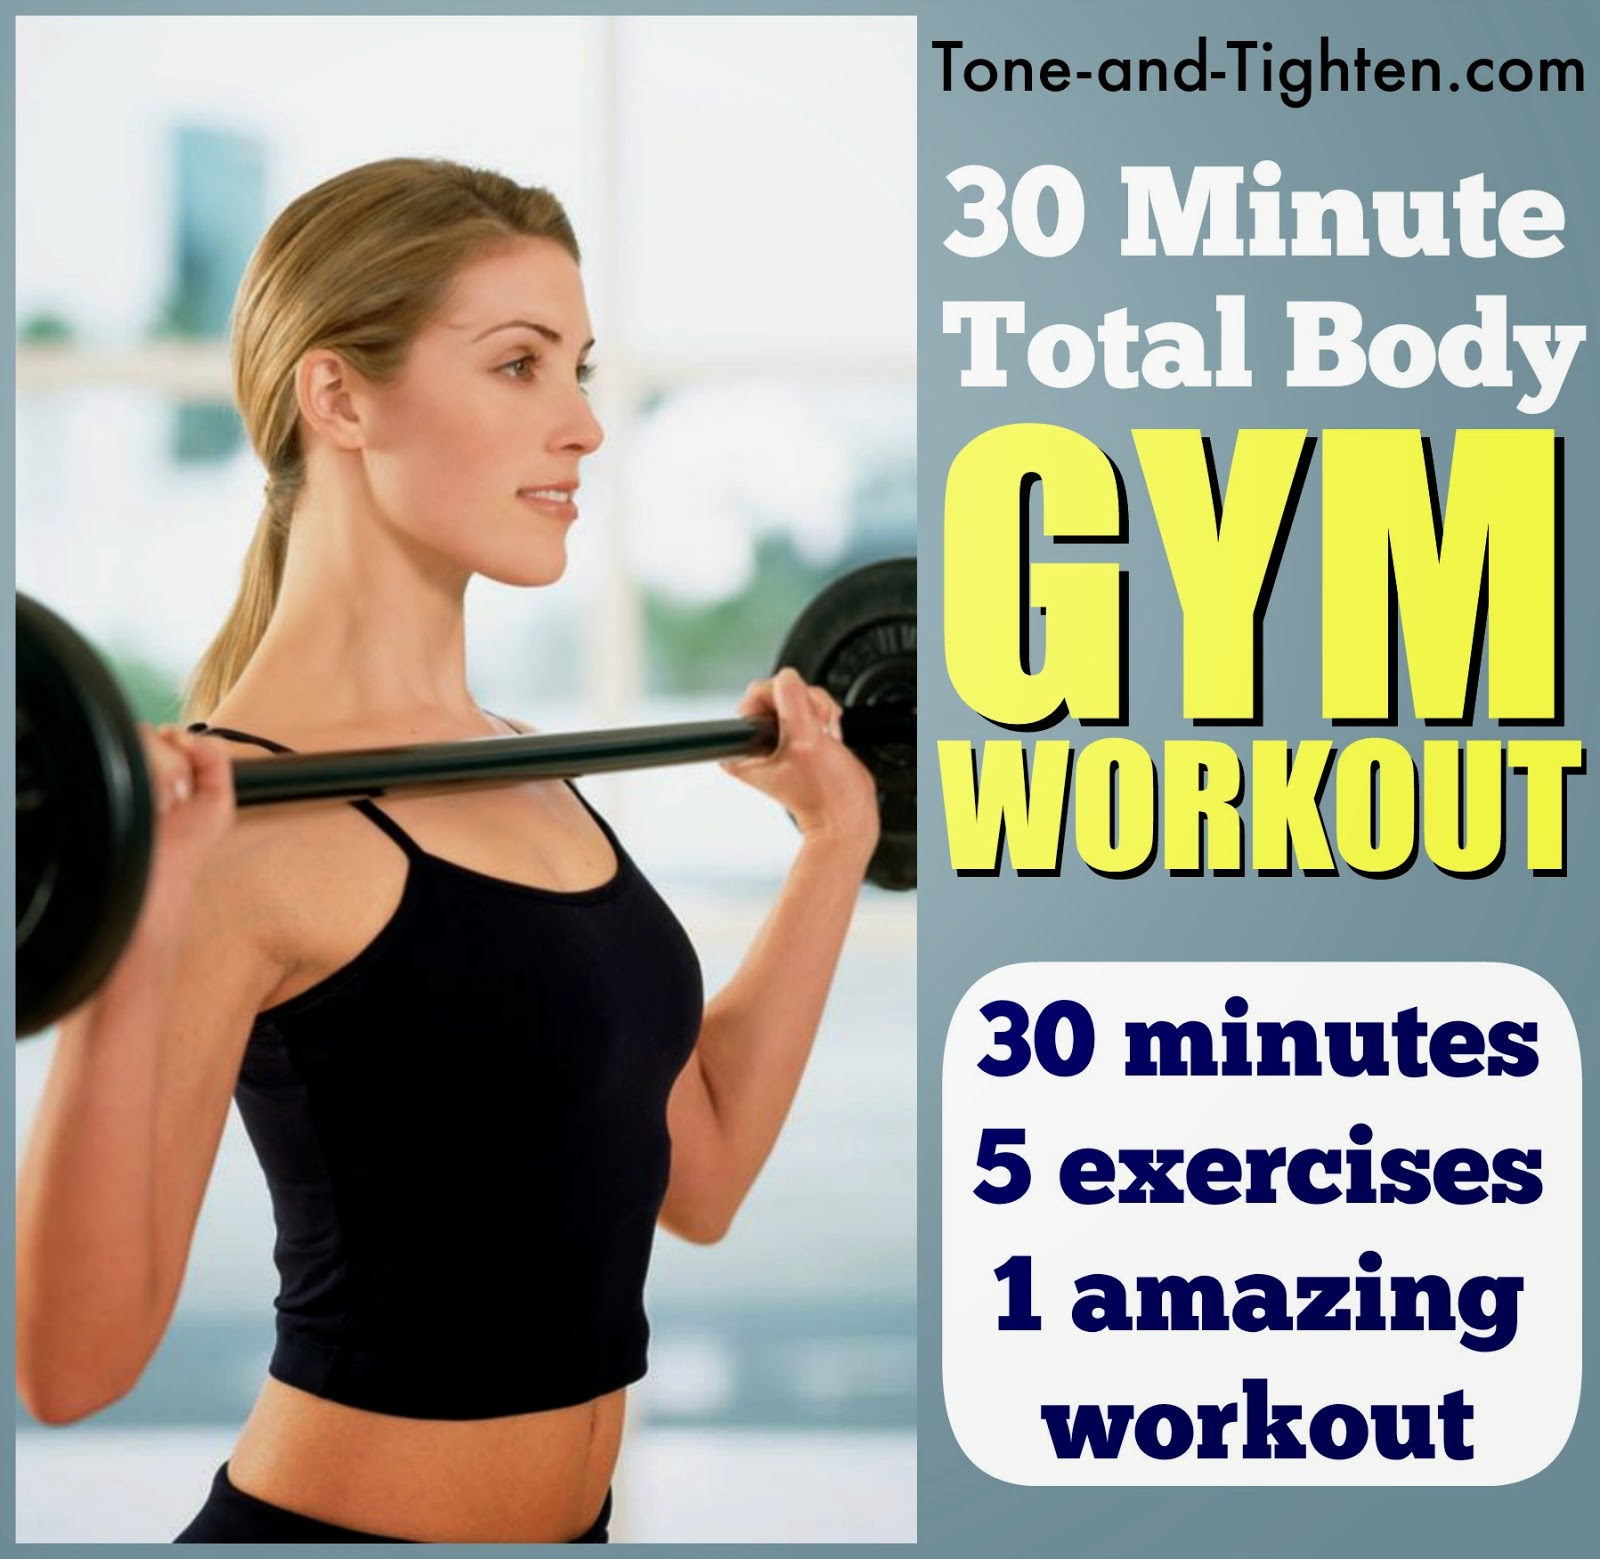 Top 10 Reasons Why You Should Be Lifting Weights Fitness Faq Tone